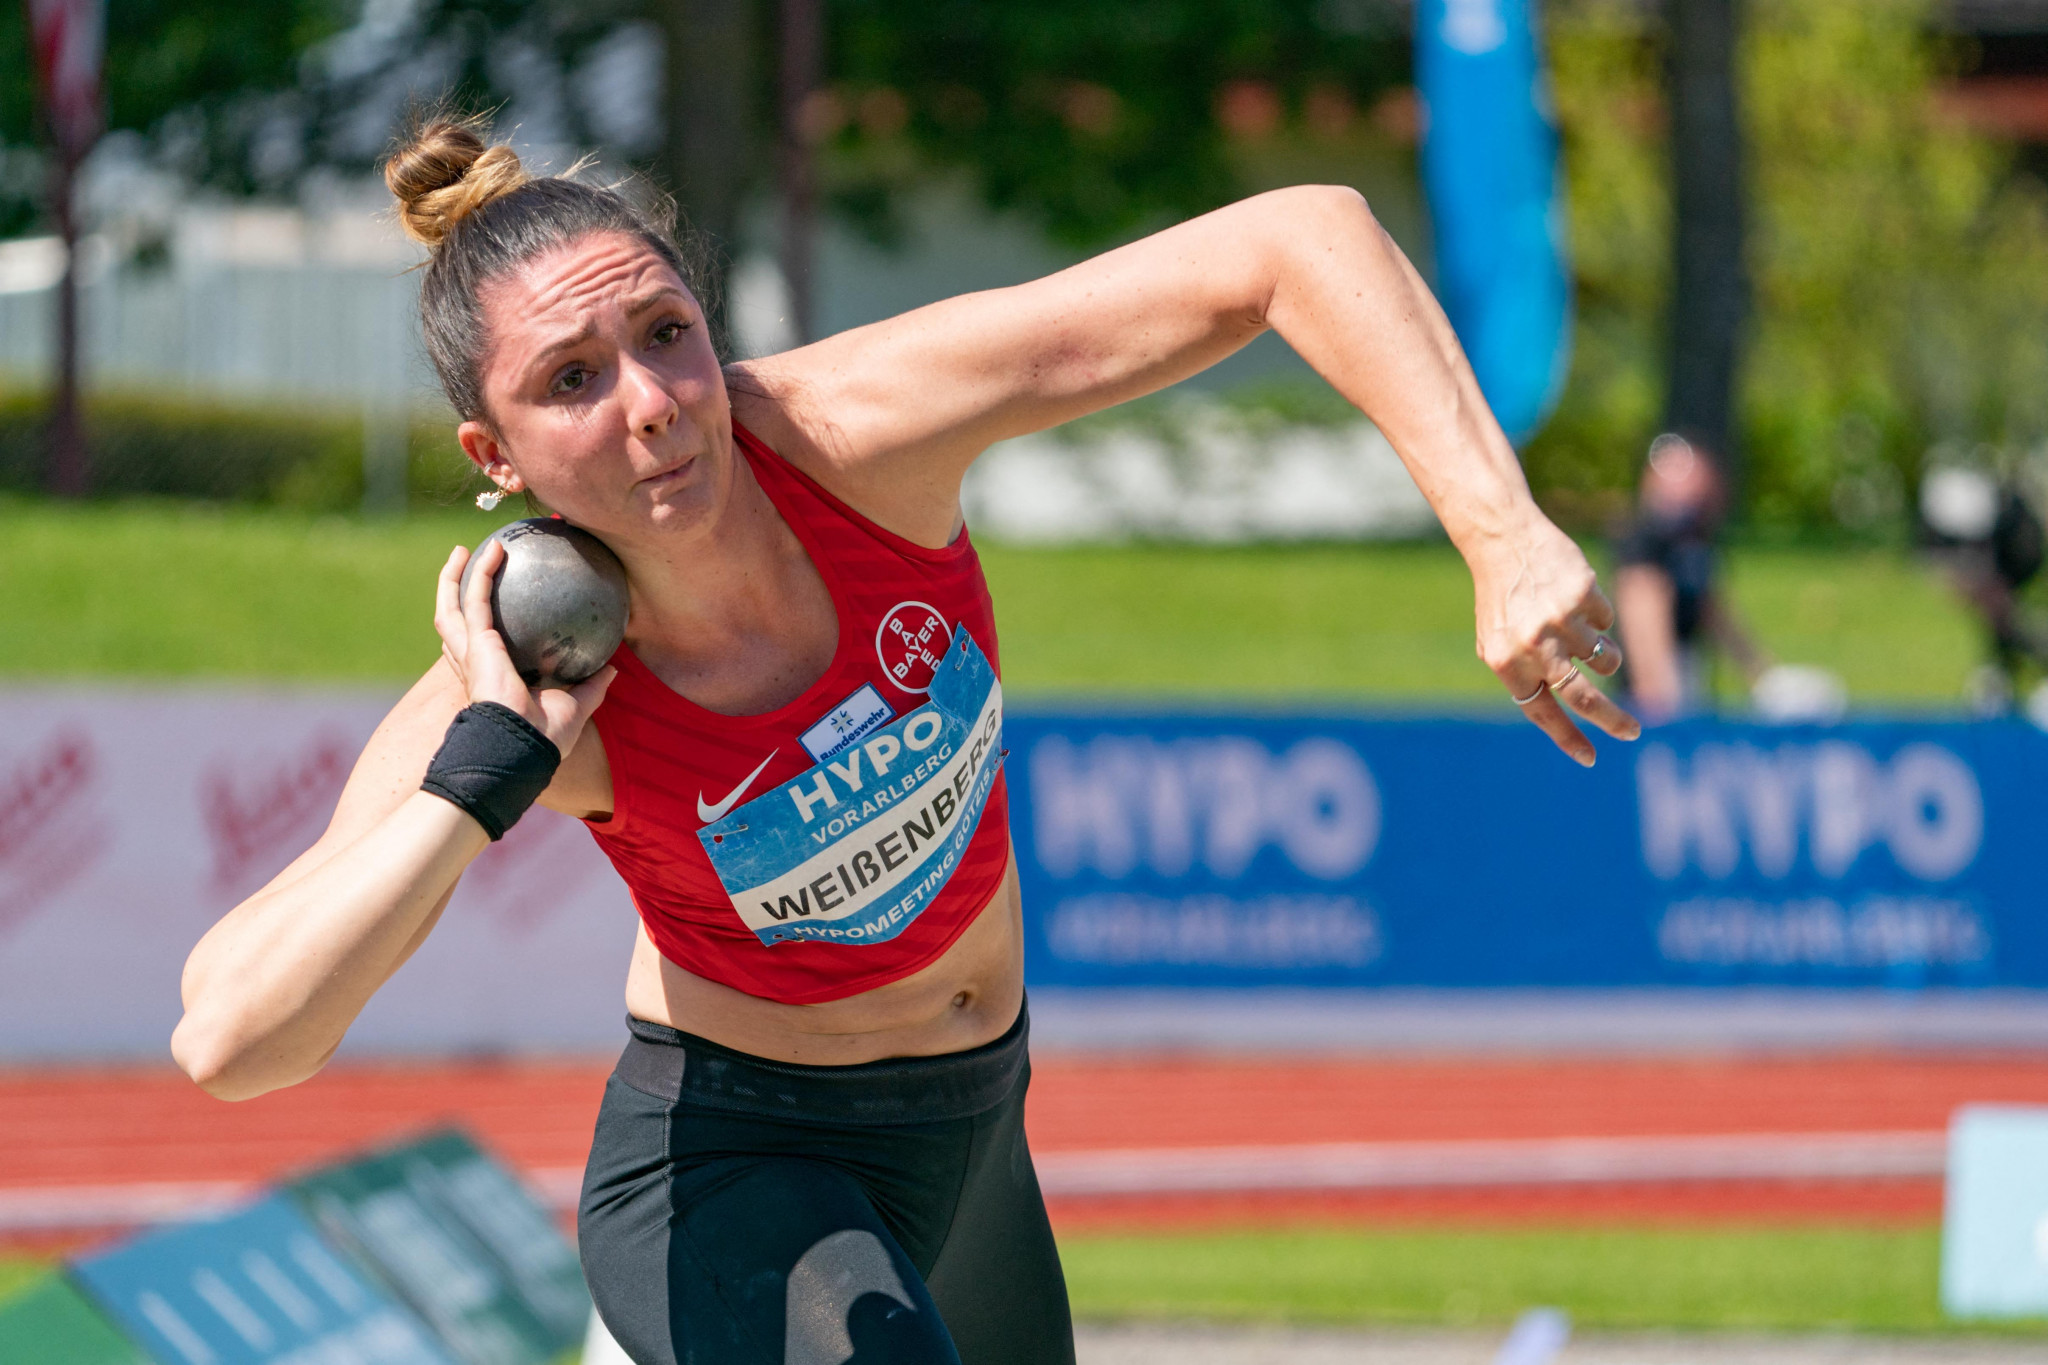 Ehammer and Weissenberg lead at World Athletics Combined Events Tour Gold leg in Ratingen